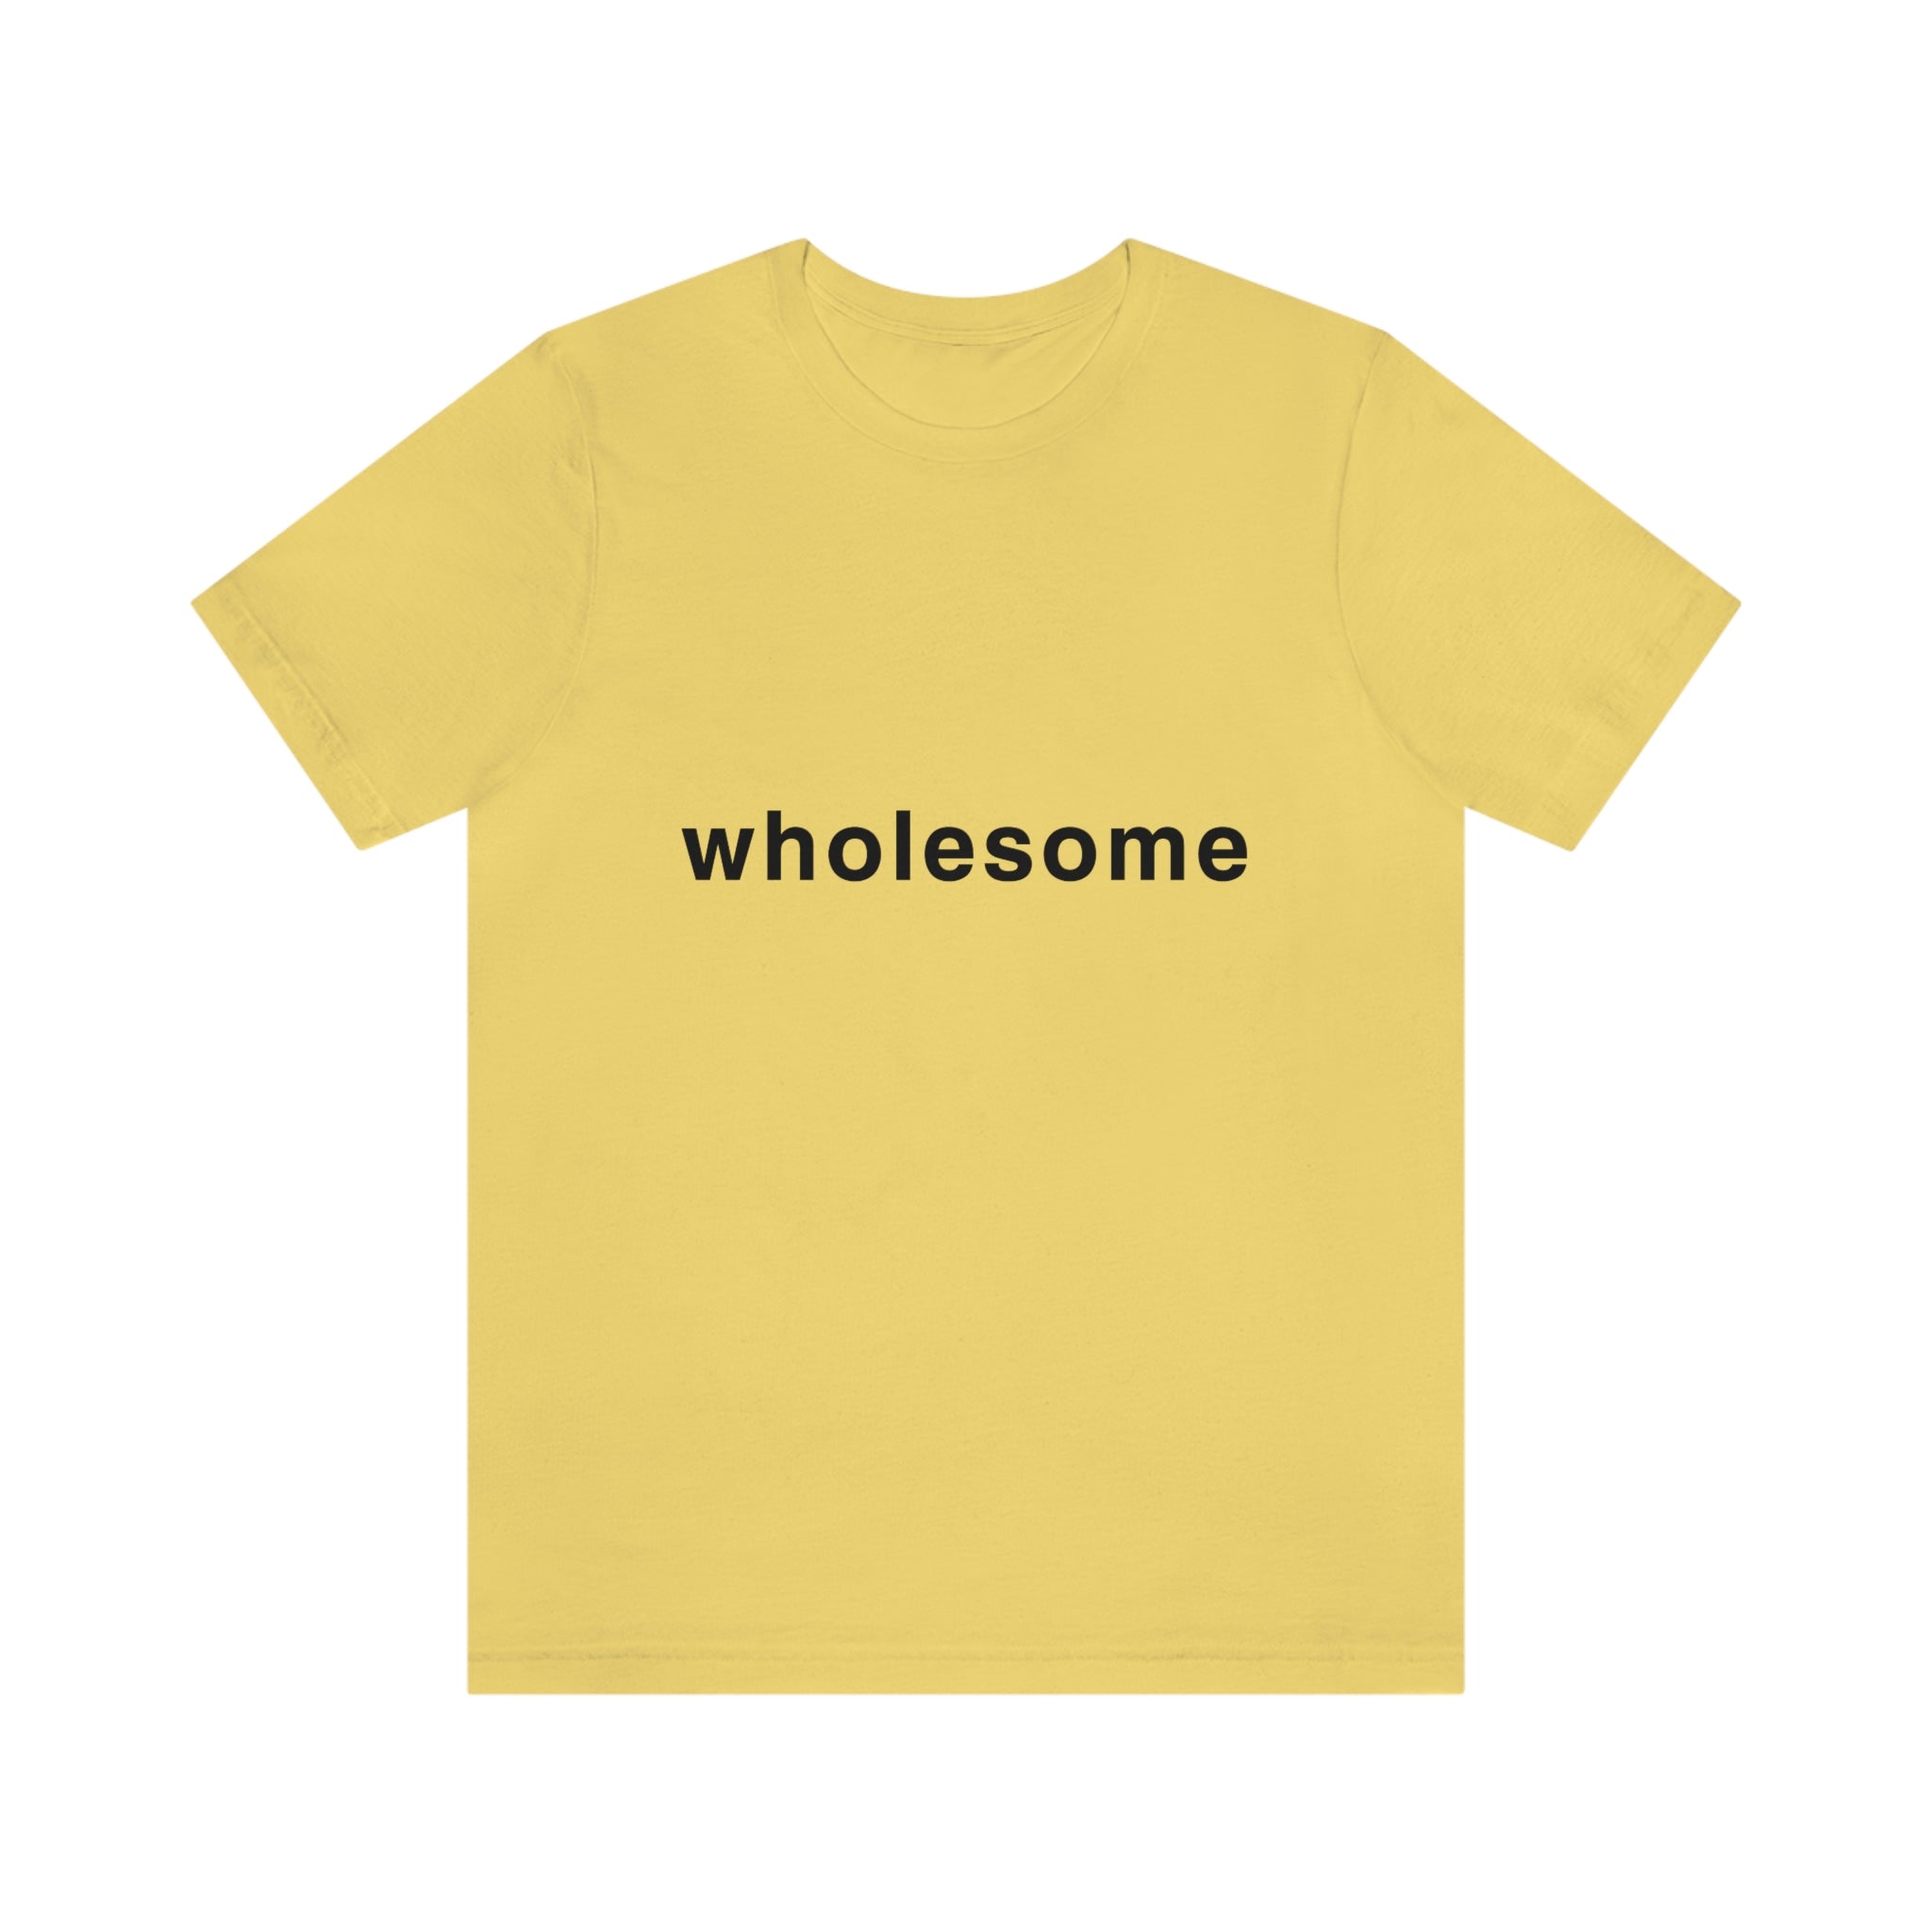 Unbranded Plain wholesome - On Yellow : Unisex 100% Comfy Cotton T-Shirt